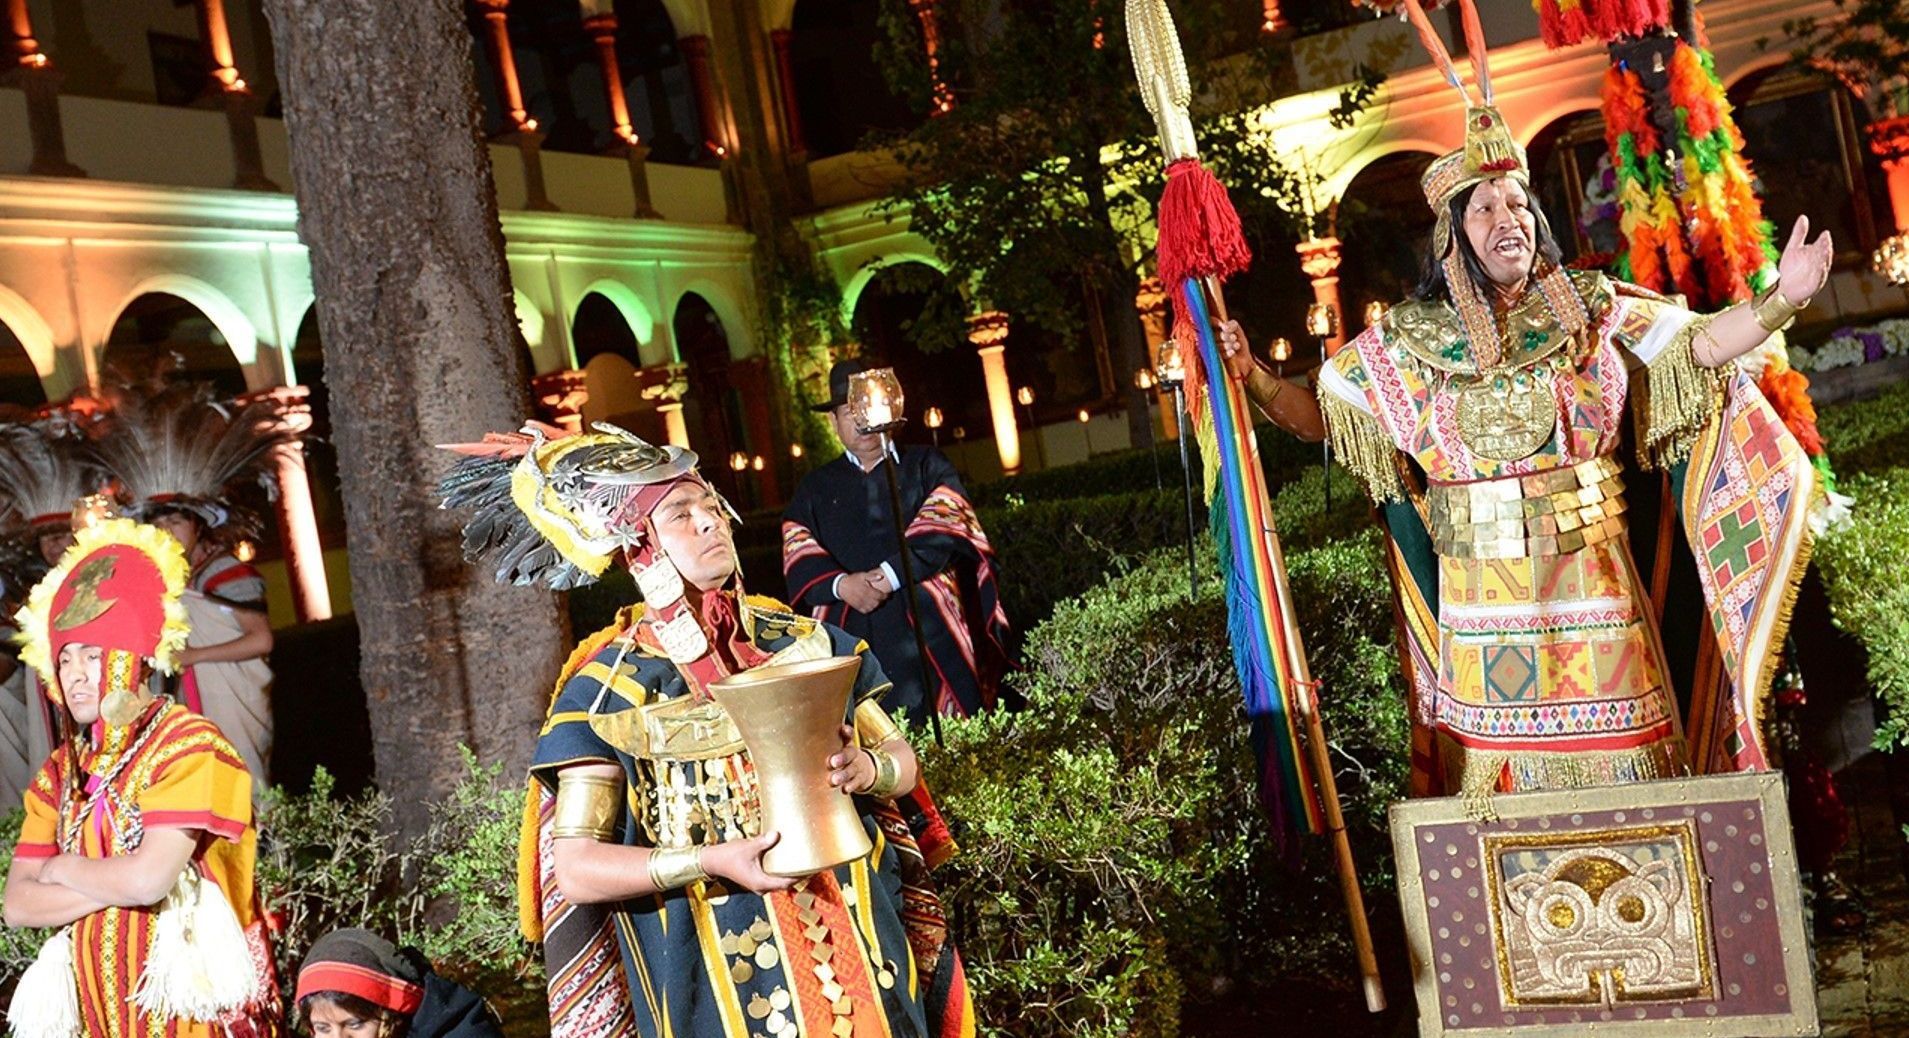 Inti Raymi celebrates Andean culture with rituals, music, and colorful ceremonies